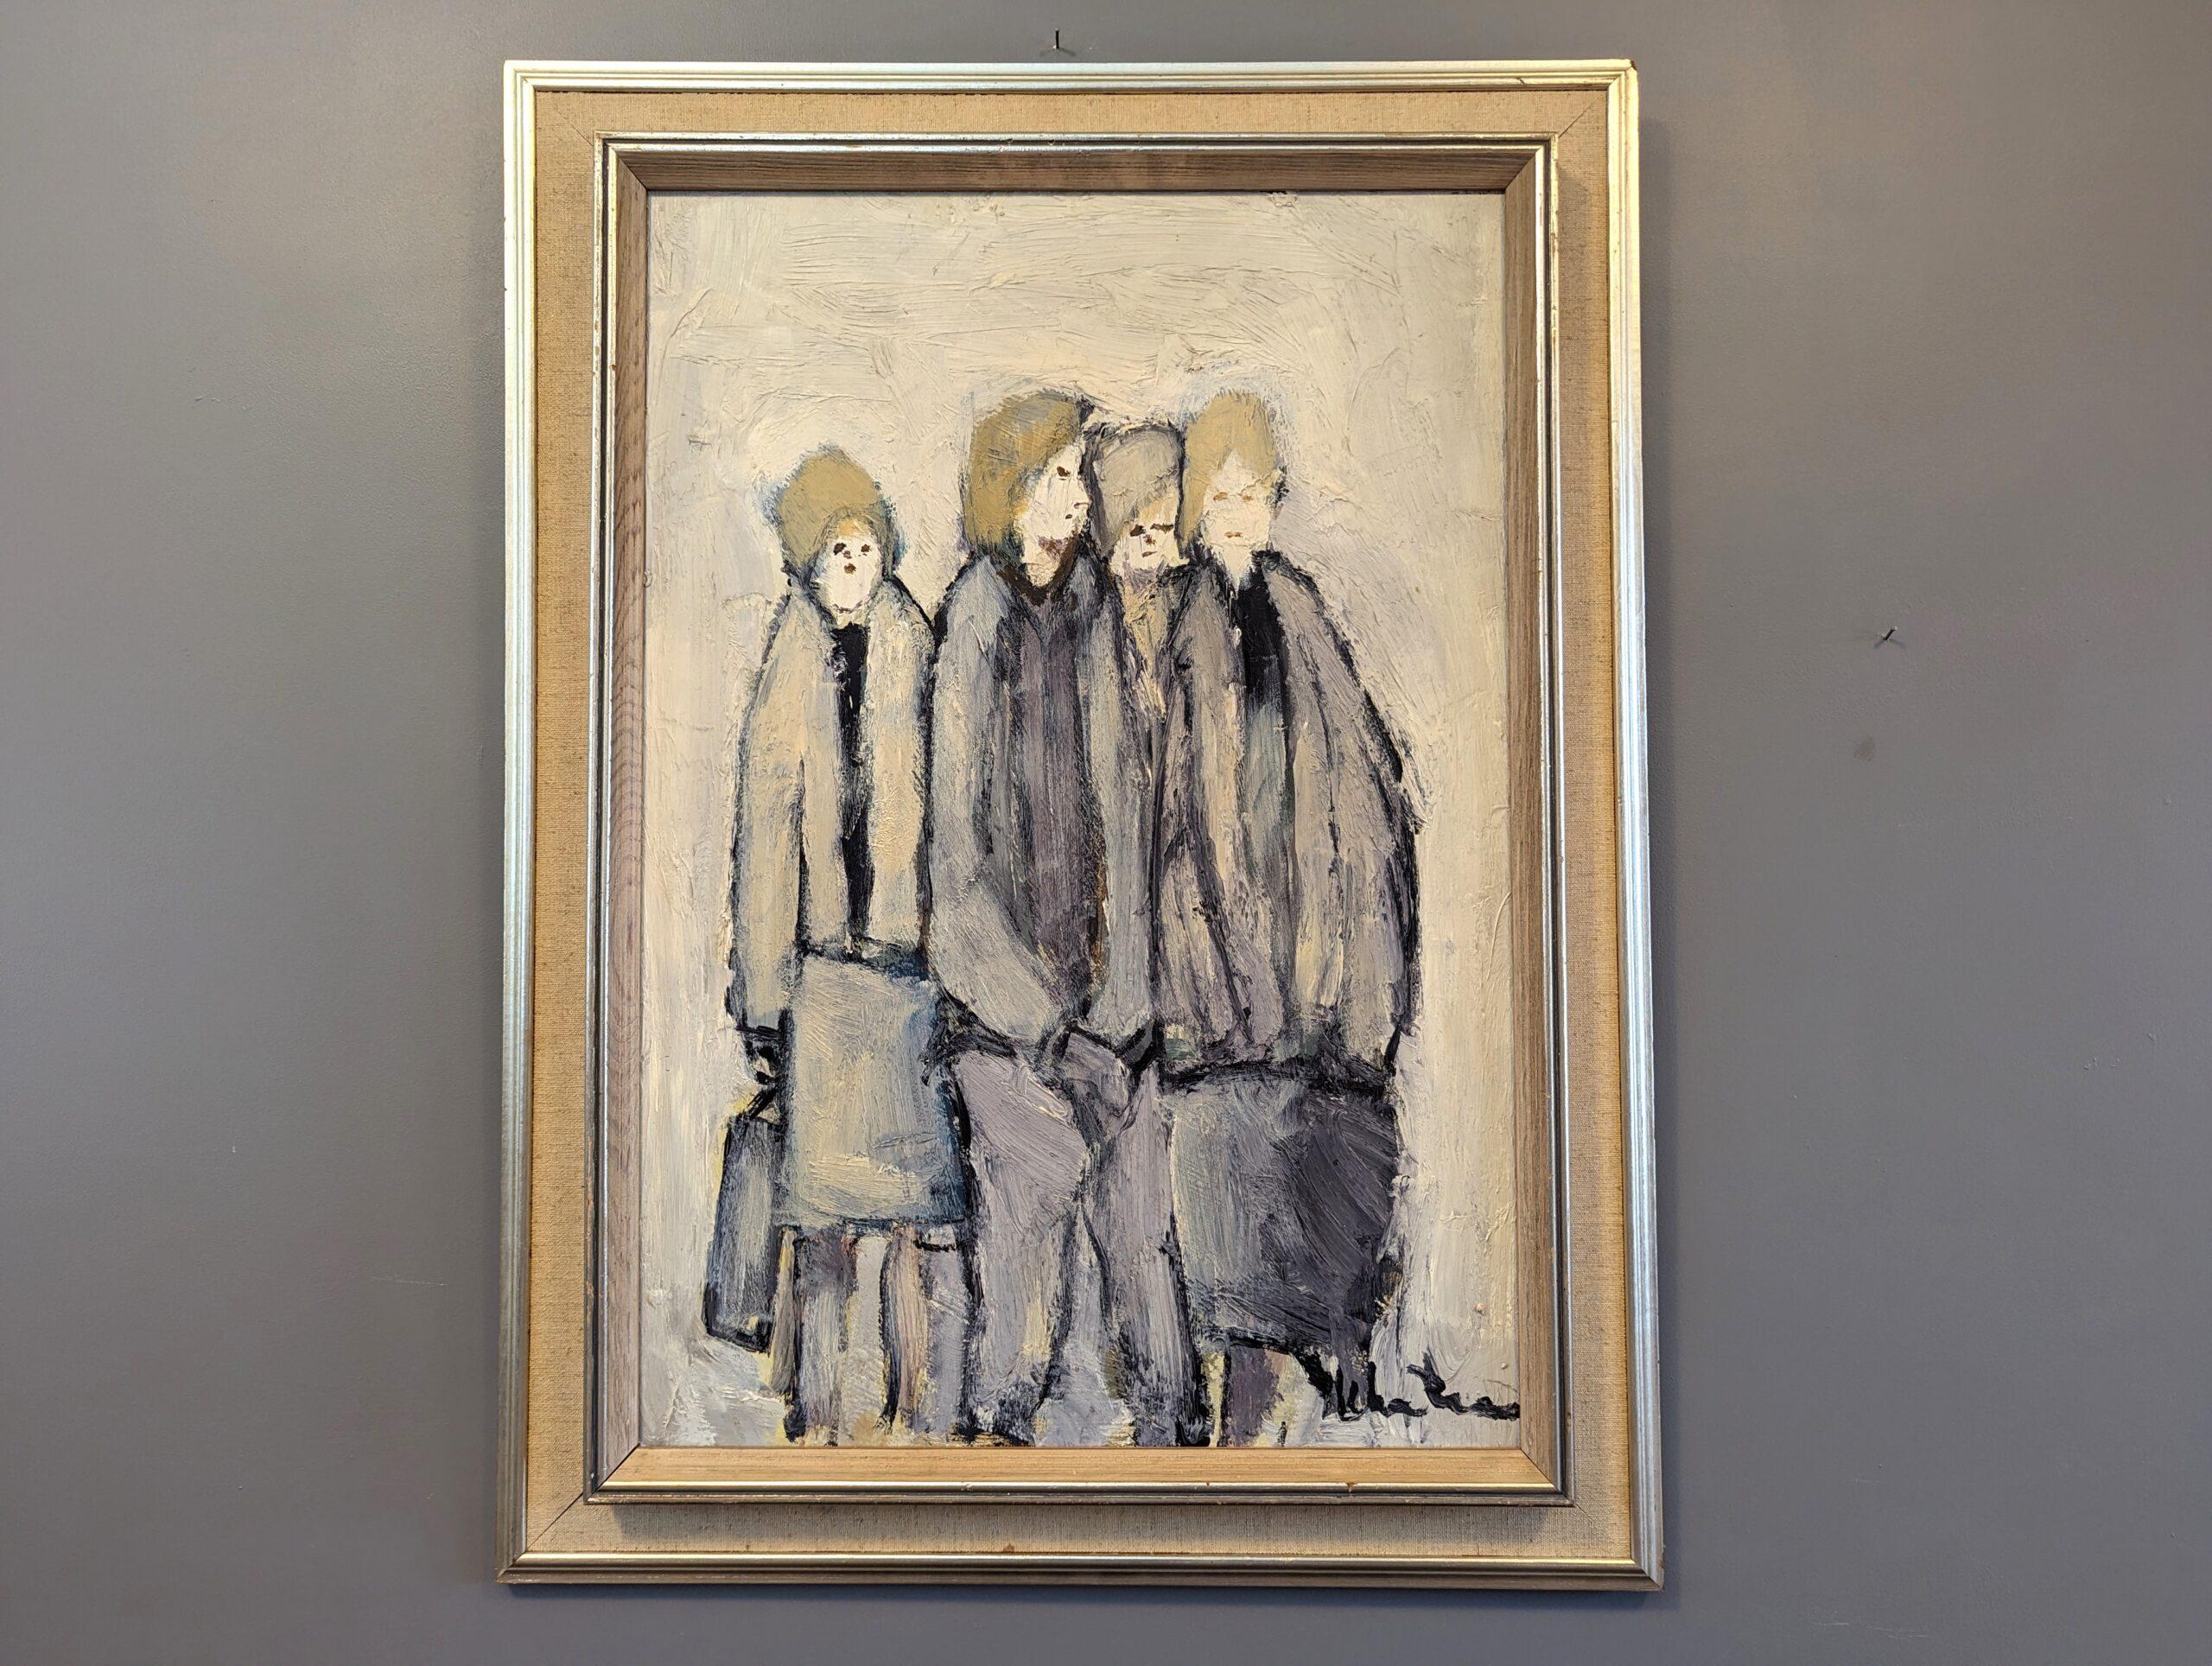 BUNCH OF FRIENDS
Size: 72.5 x 54 cm (including frame)
Oil on Board

A fun mid-century figurative portrait, executed in oil onto board.

Four figures clad in matching attire are depicted huddling together. The figures, characterised by their blonde